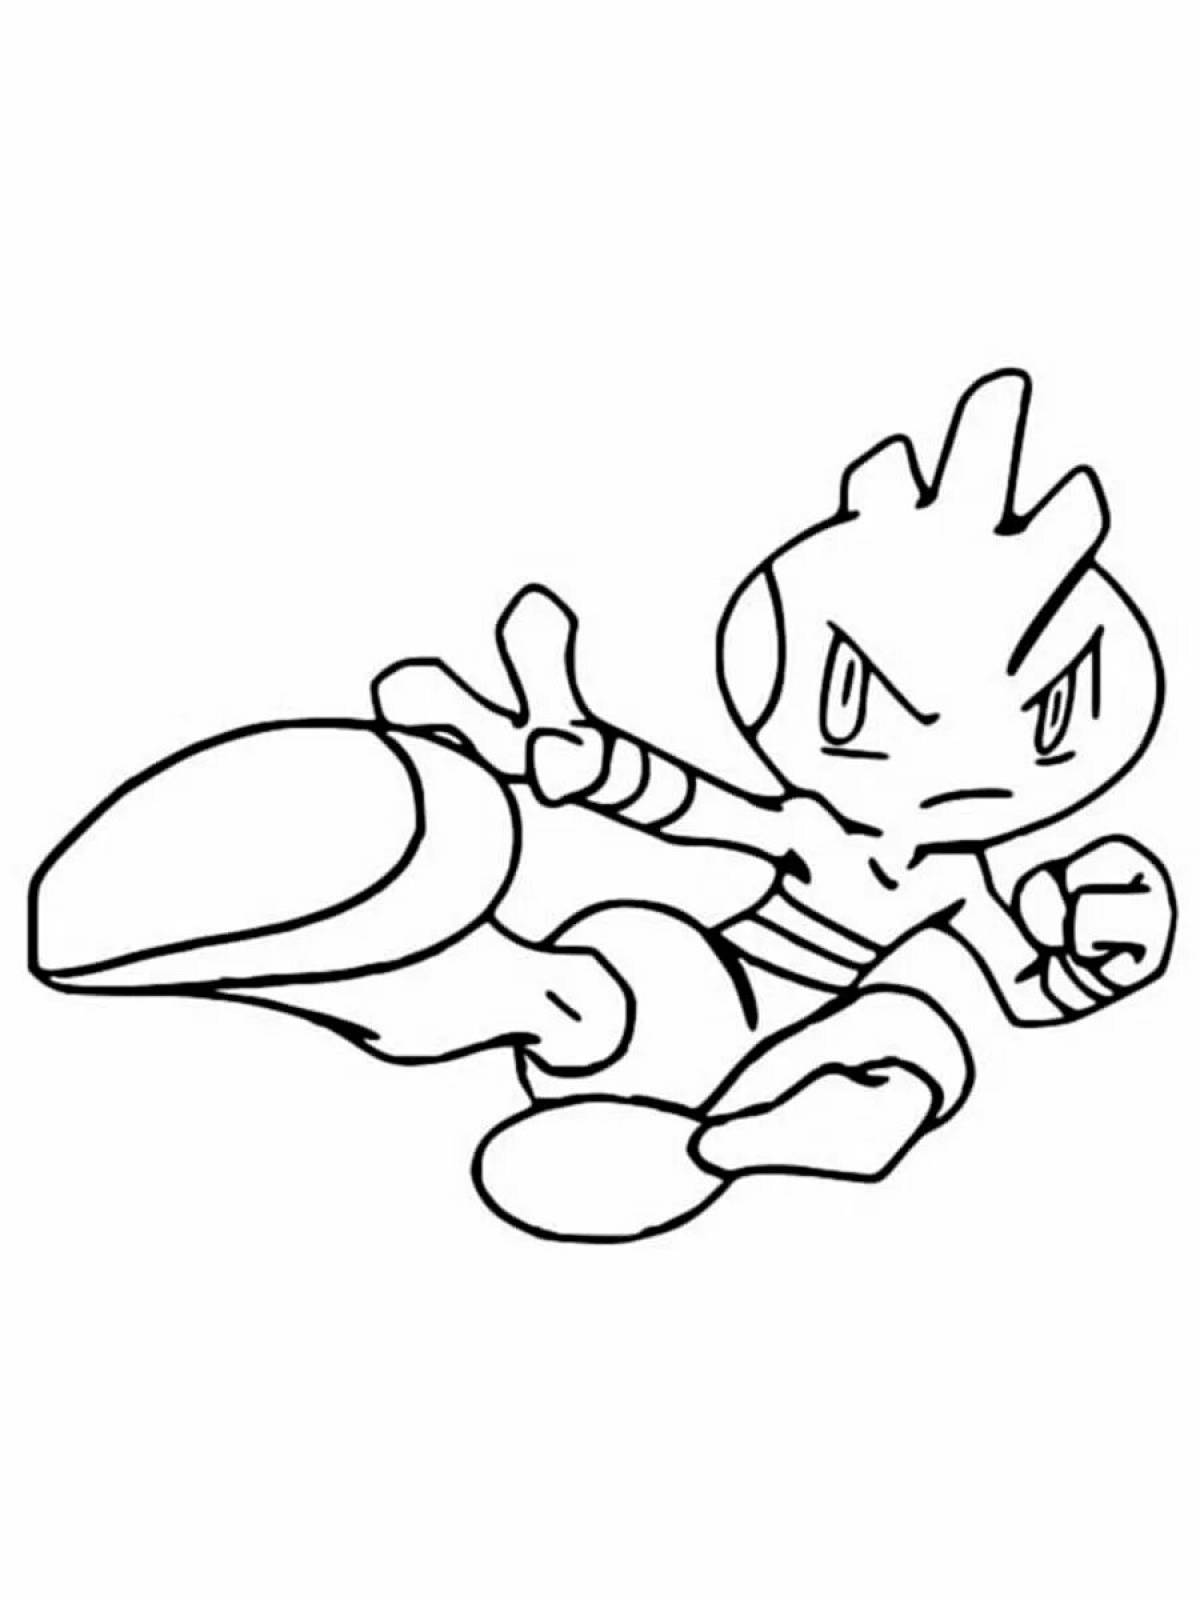 Amazing chimchar coloring page